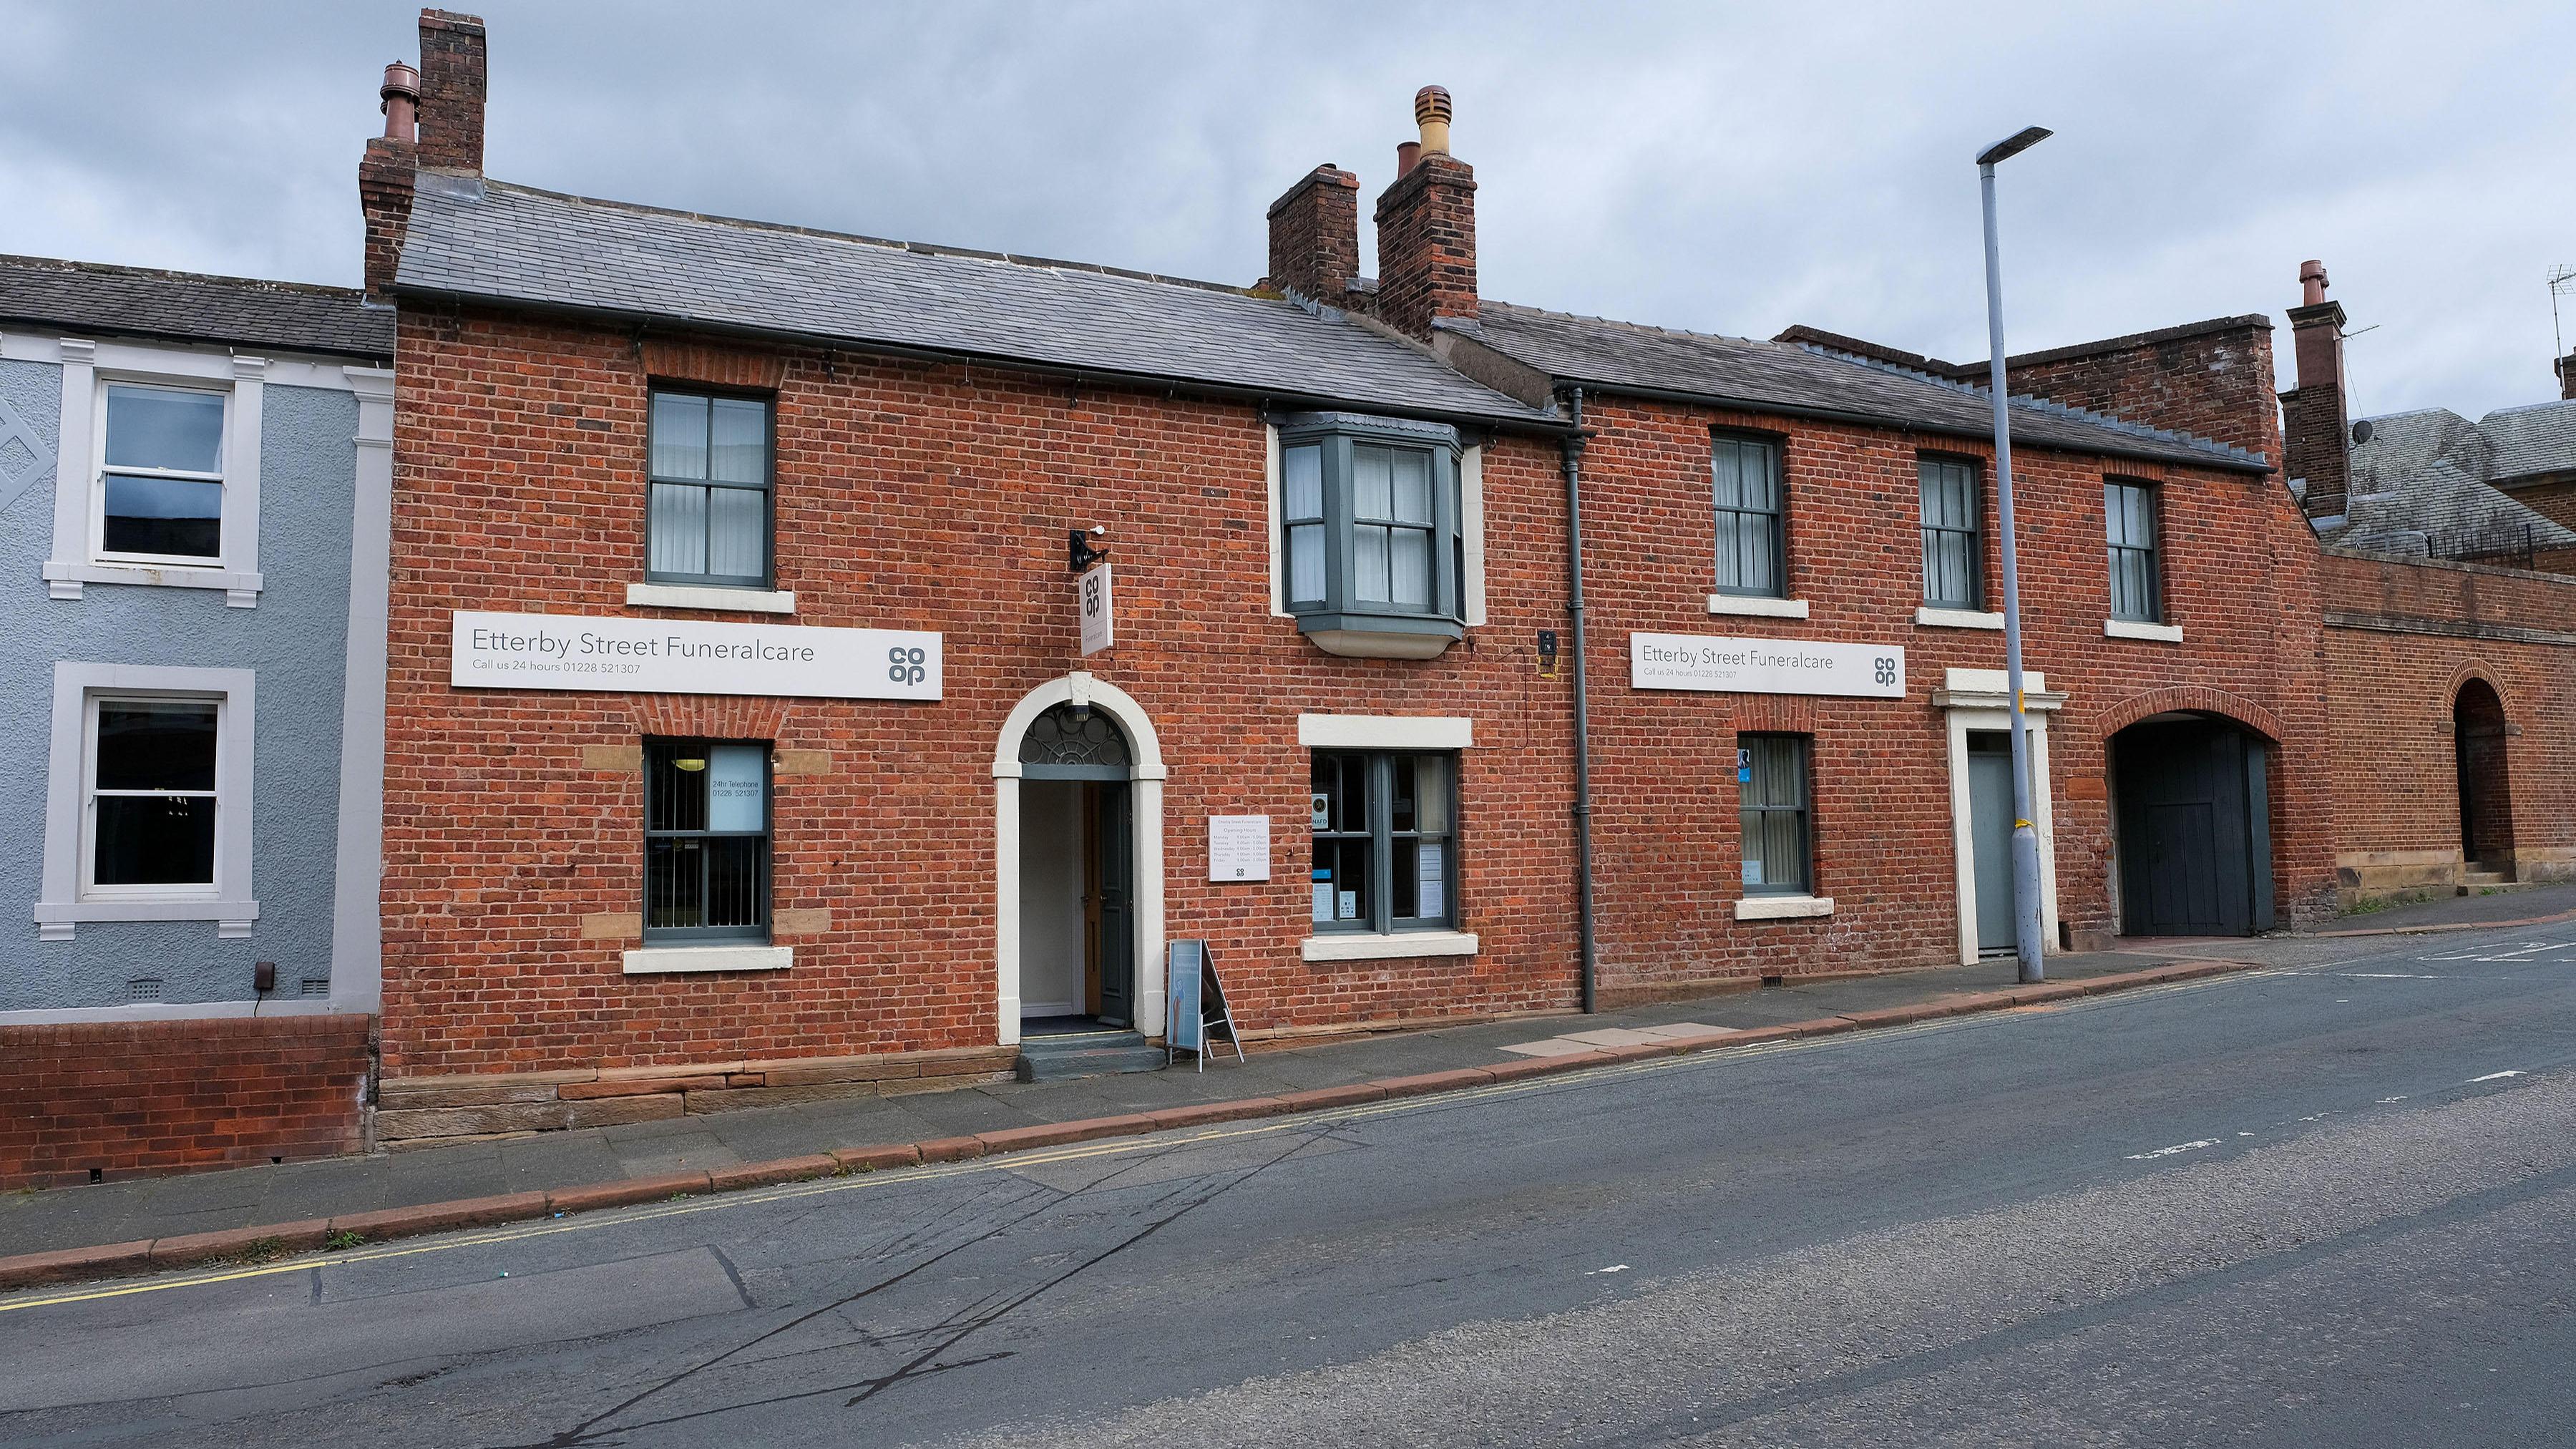 Images Etterby Street Funeralcare